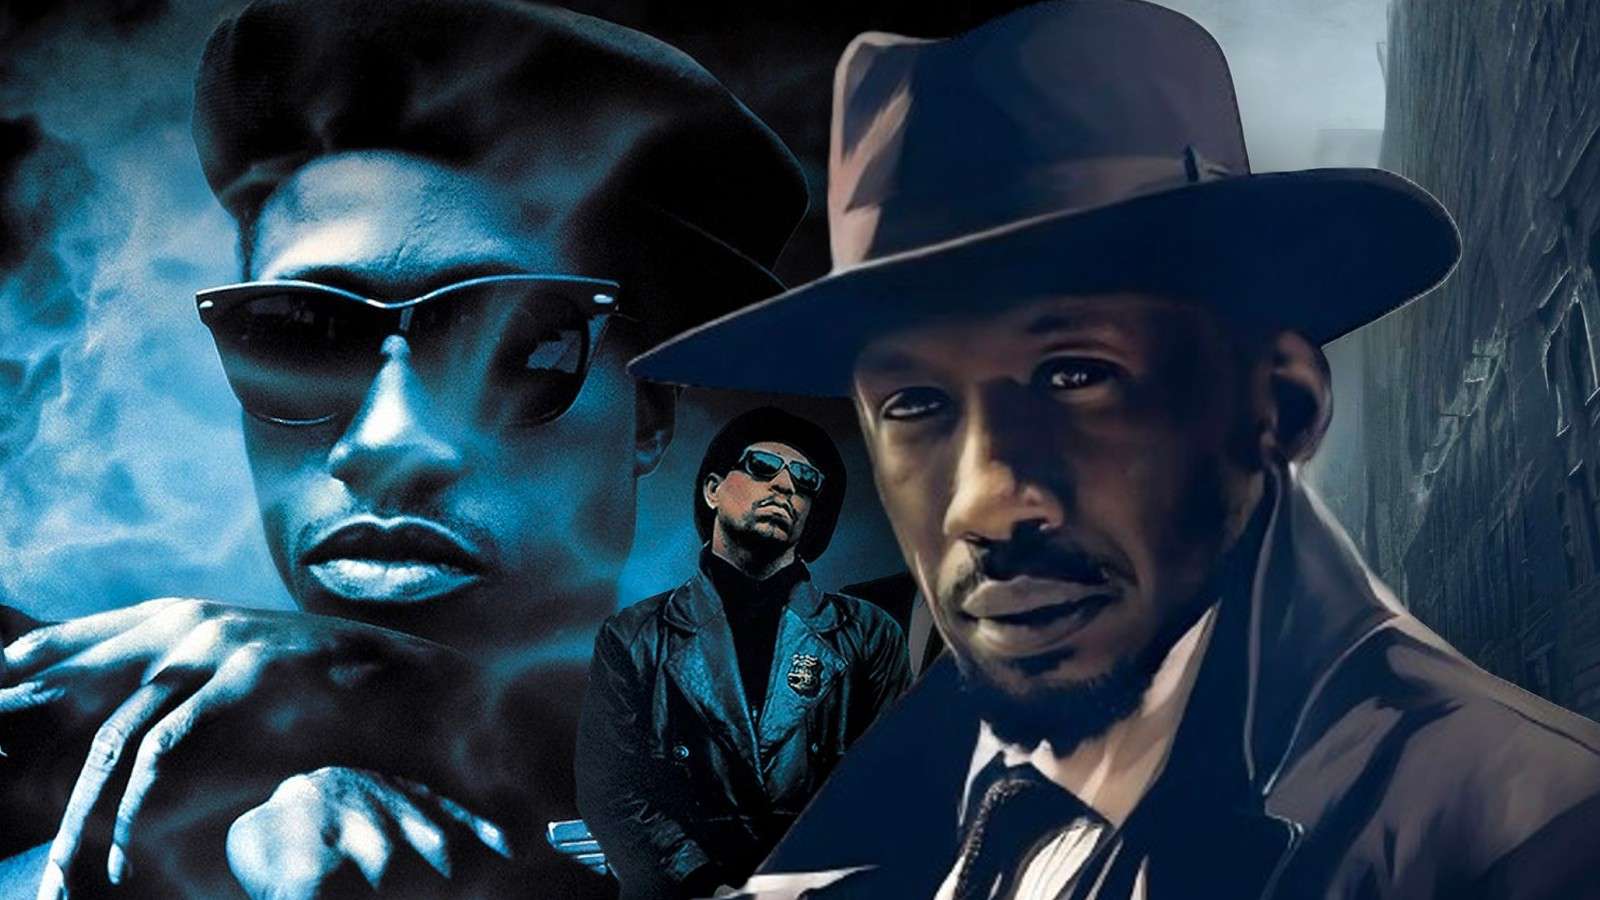 Wesley Snipes on the poster for New Jack City and an AI image of Mahershala Ali